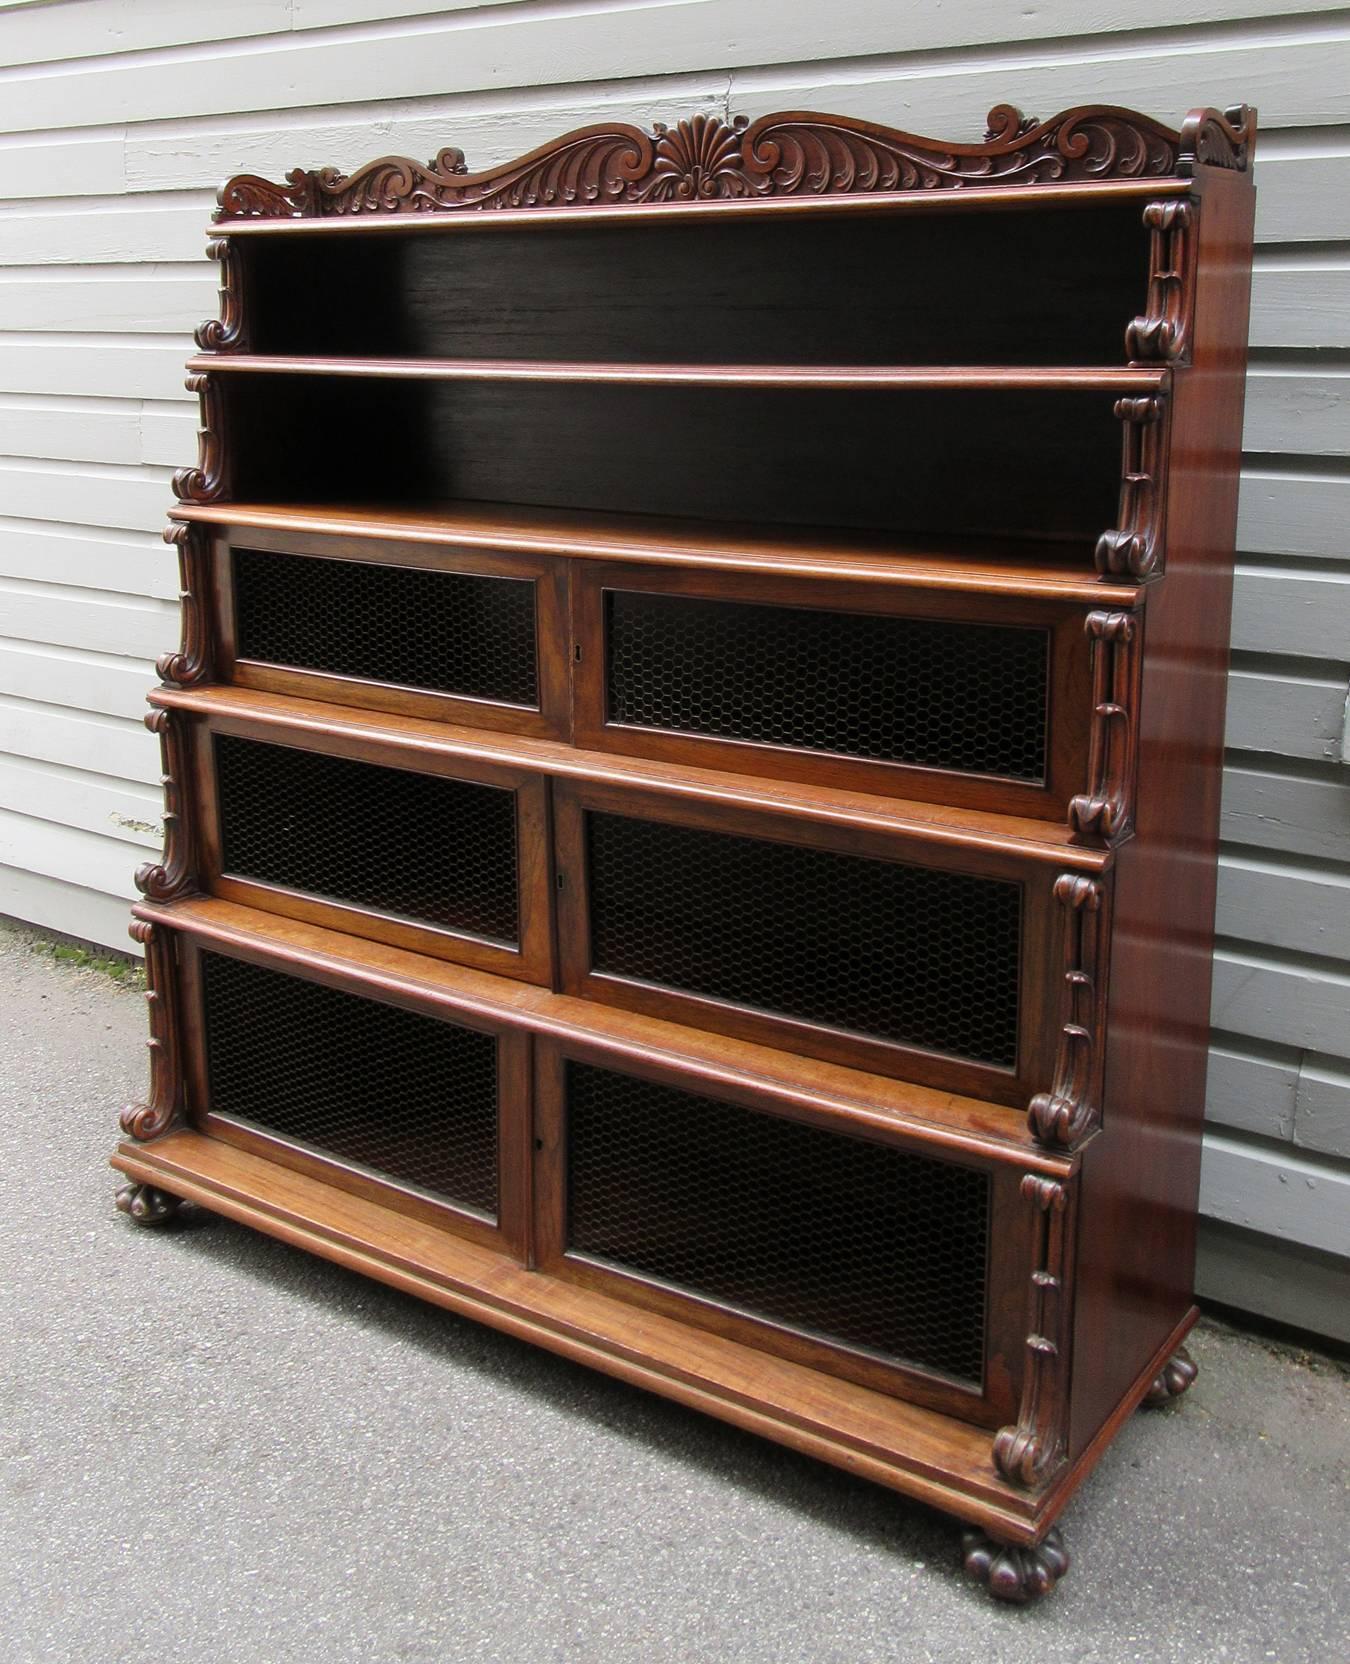 A West Indies Regency style rosewood bookcase, circa 1820, featuring six-tiered shelves with three wire cabinet doors and H-shell, wave, scroll and shell carvings. This Caribbean bookcase was likely from Jamaica or Barbados.